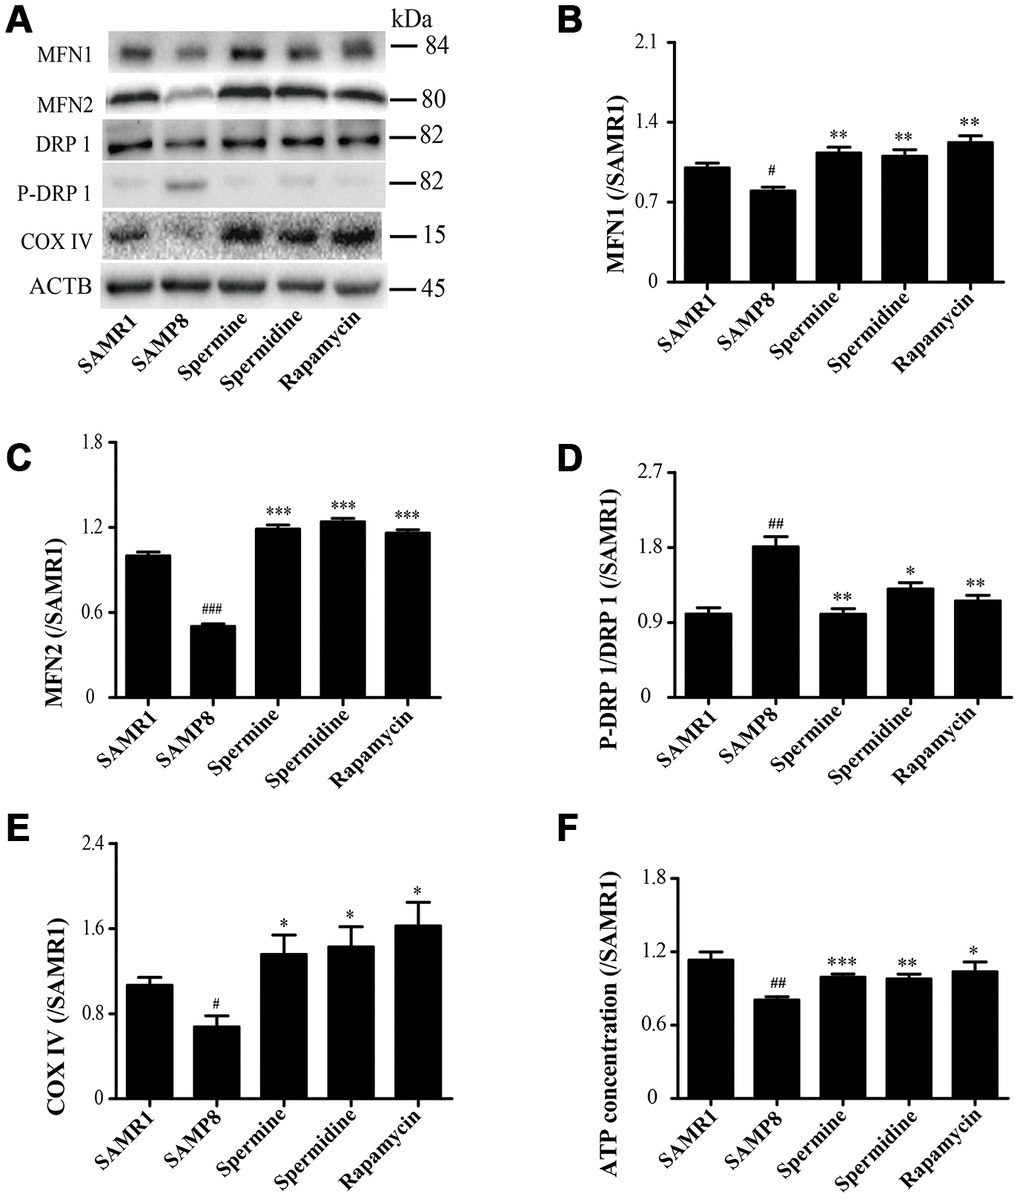 Spermidine and spermine redress mitochondrial dysfunction in SAMP8. (A) The western blot of mitochondrial protein. (B) The expression of MFN1 in the brain. (C) The expression of MFN2 in the brain. (D) The expression of P-DRP1 in the brain. (E) The expression of COX IV in the brain. (F) The concentration of ATP in the brain. Data represent mean ± SEM (n = 3 per group). #P ##P ###P P P P 